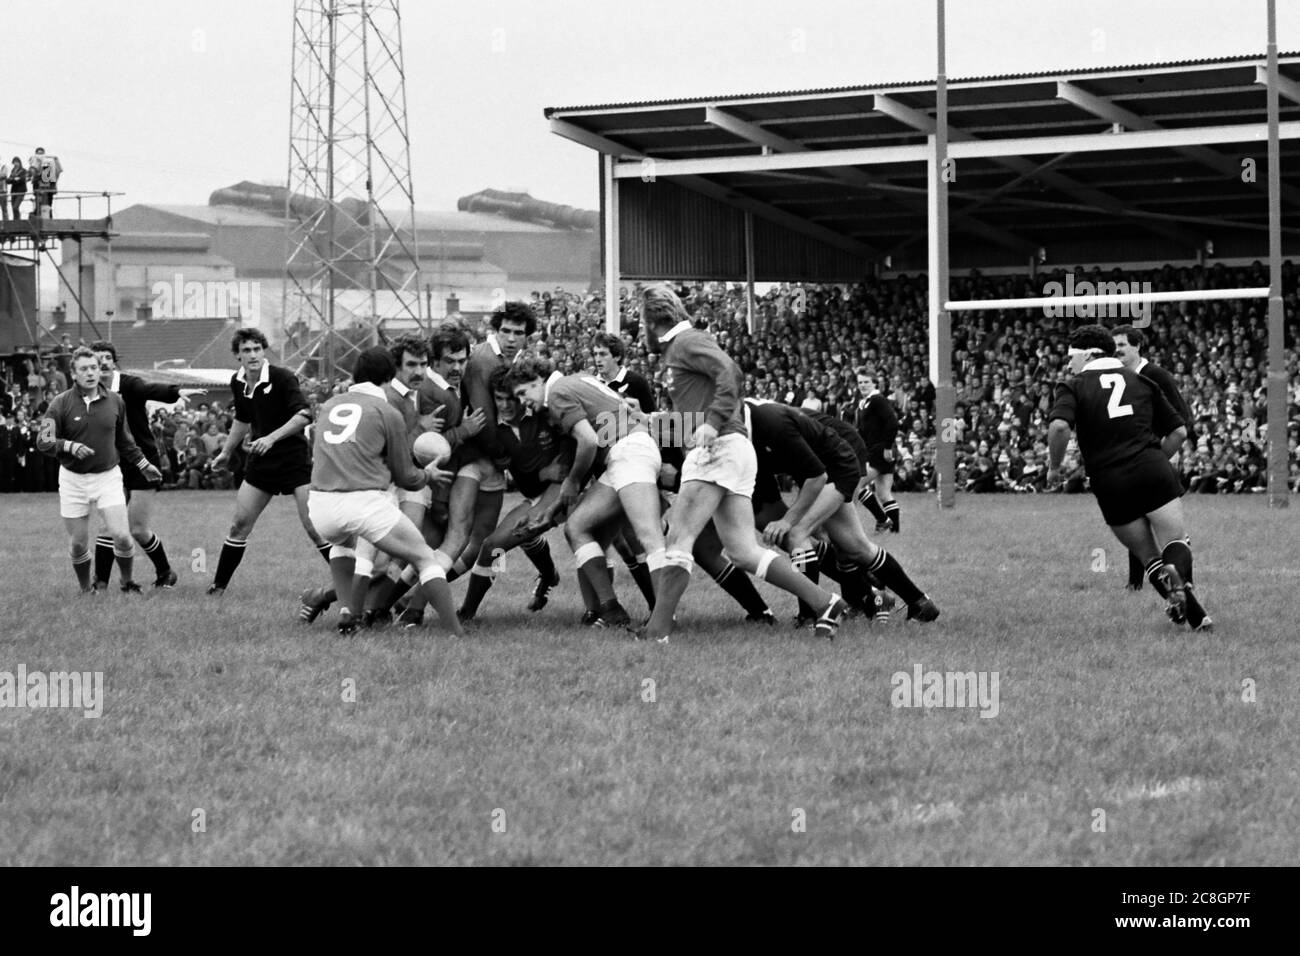 Llanelli RFCs David Pickering feeding the ball to scrum half Mark Douglas in their game against the touring New Zealand All Blacks at Stradey Park, Llanelli on 21 October 1980. Stock Photo